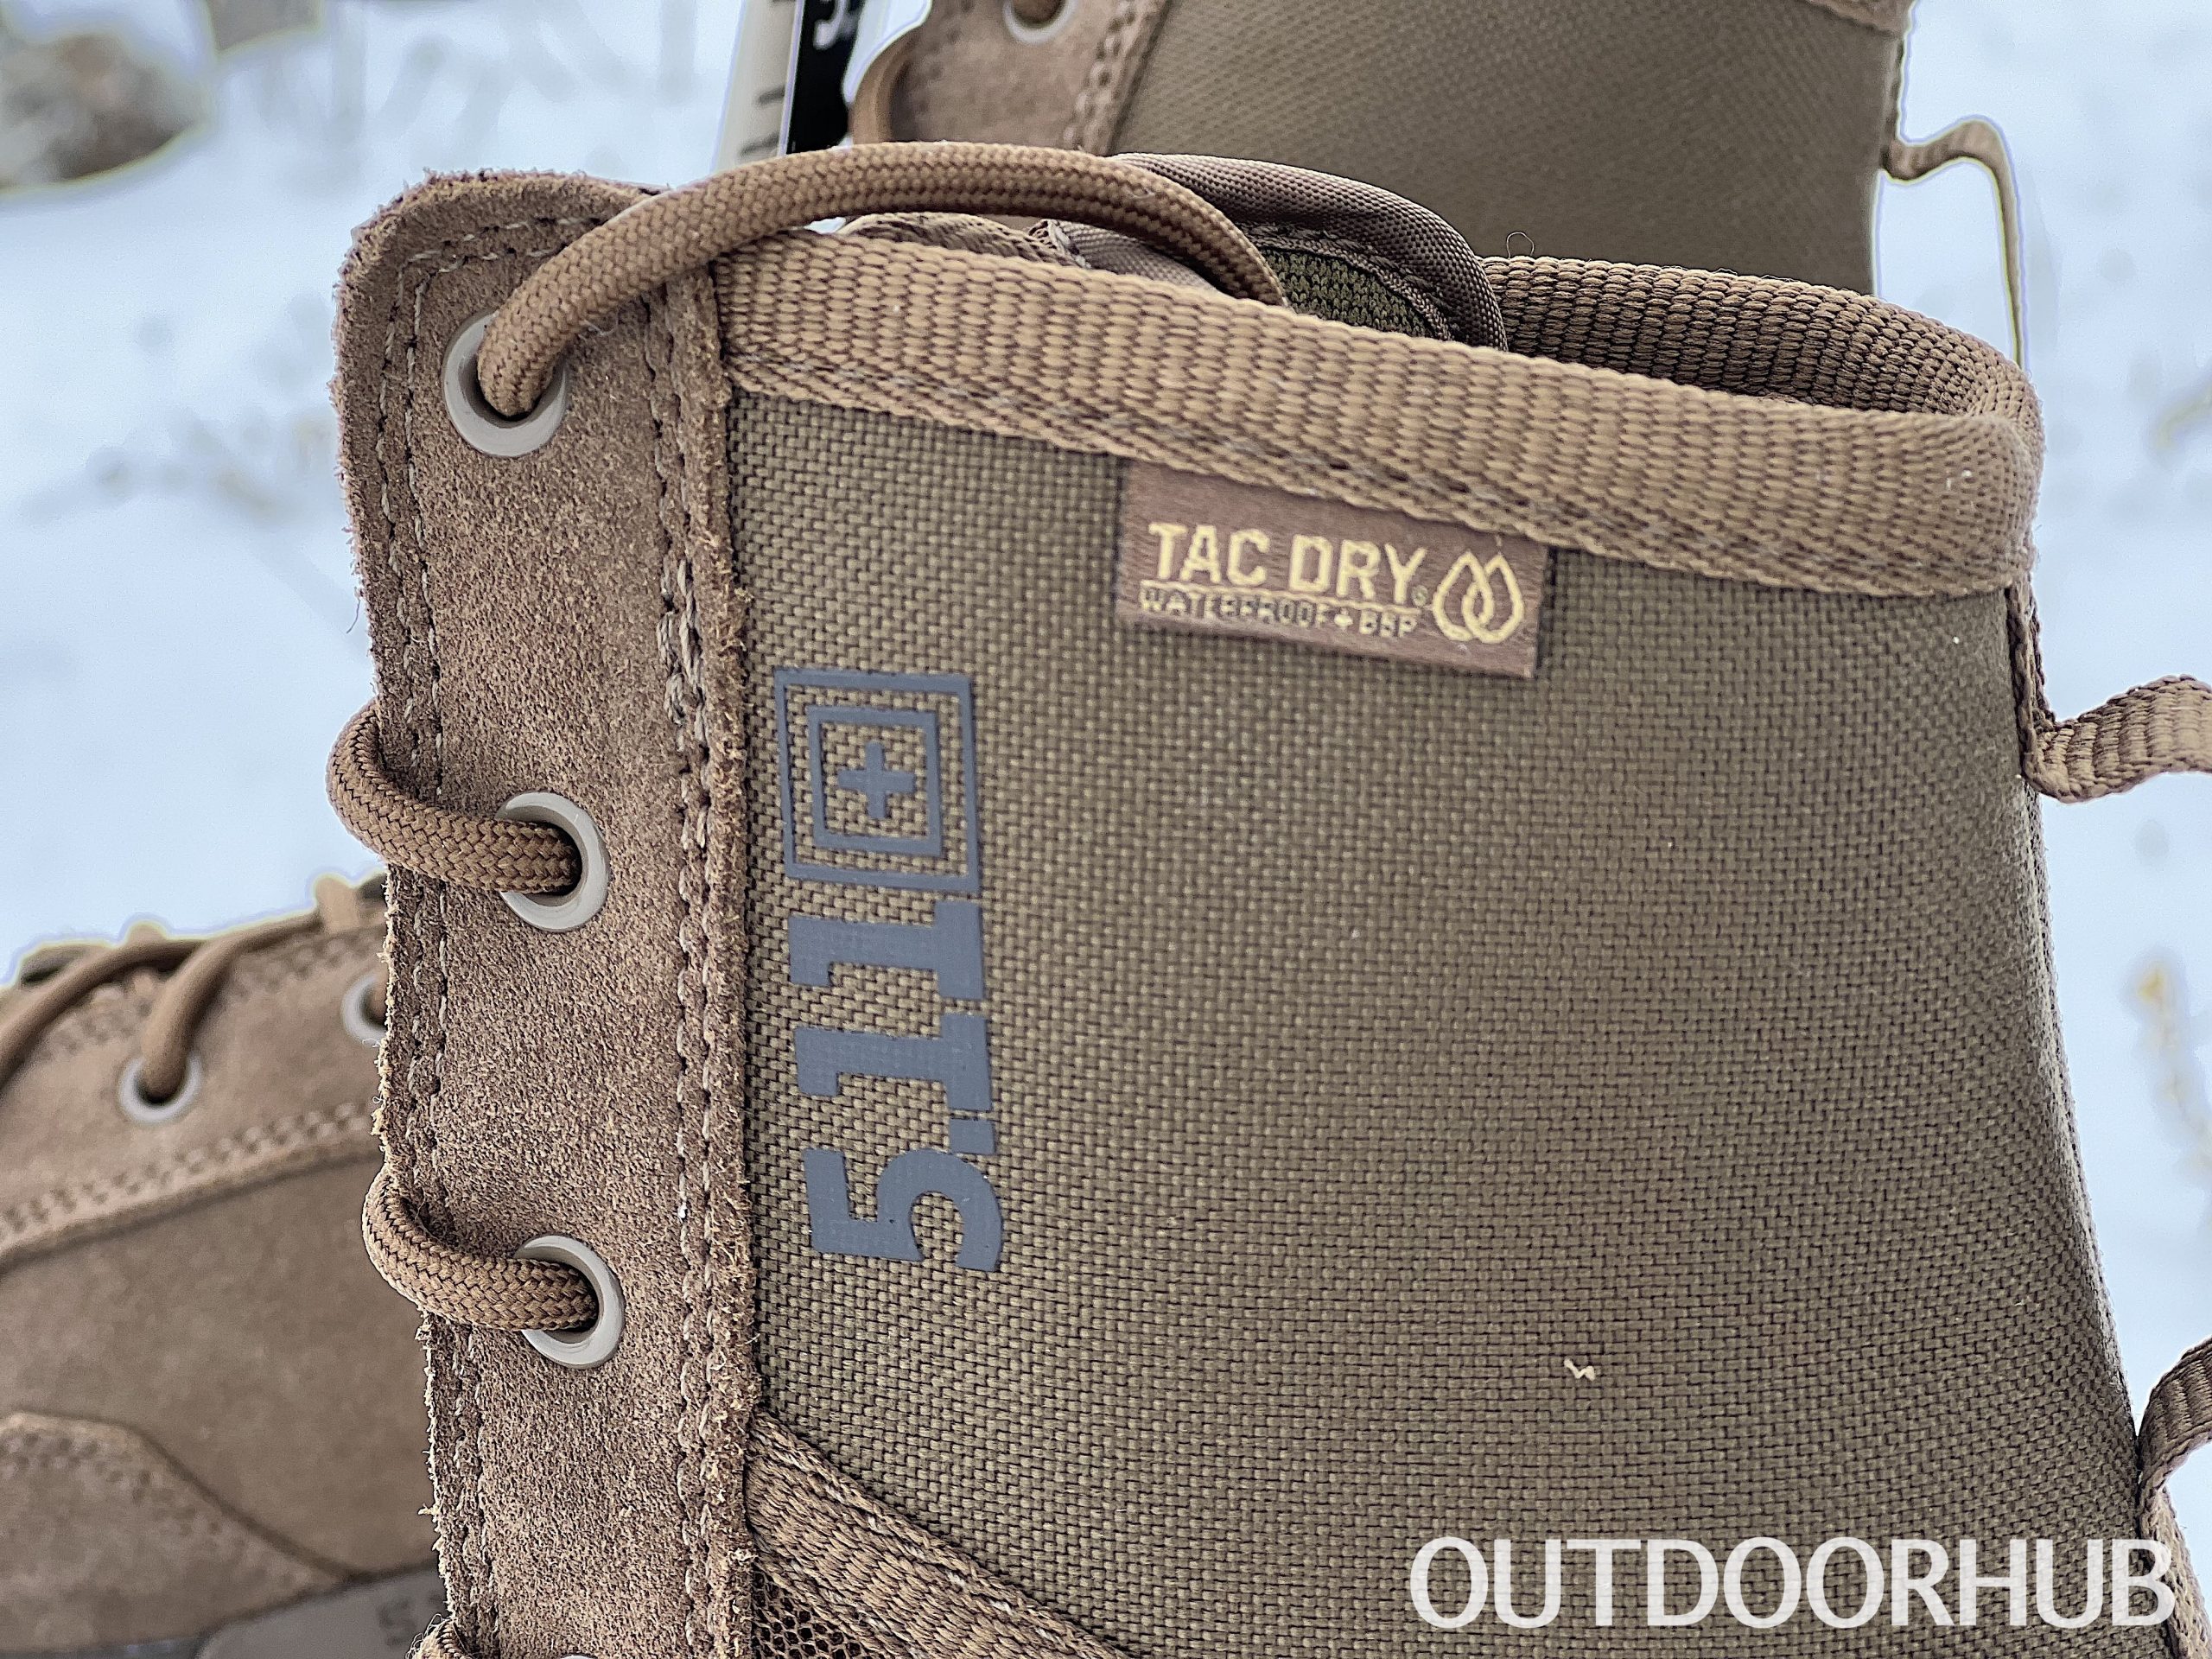 5.11 Tactical to Celebrate 20th Anniversary